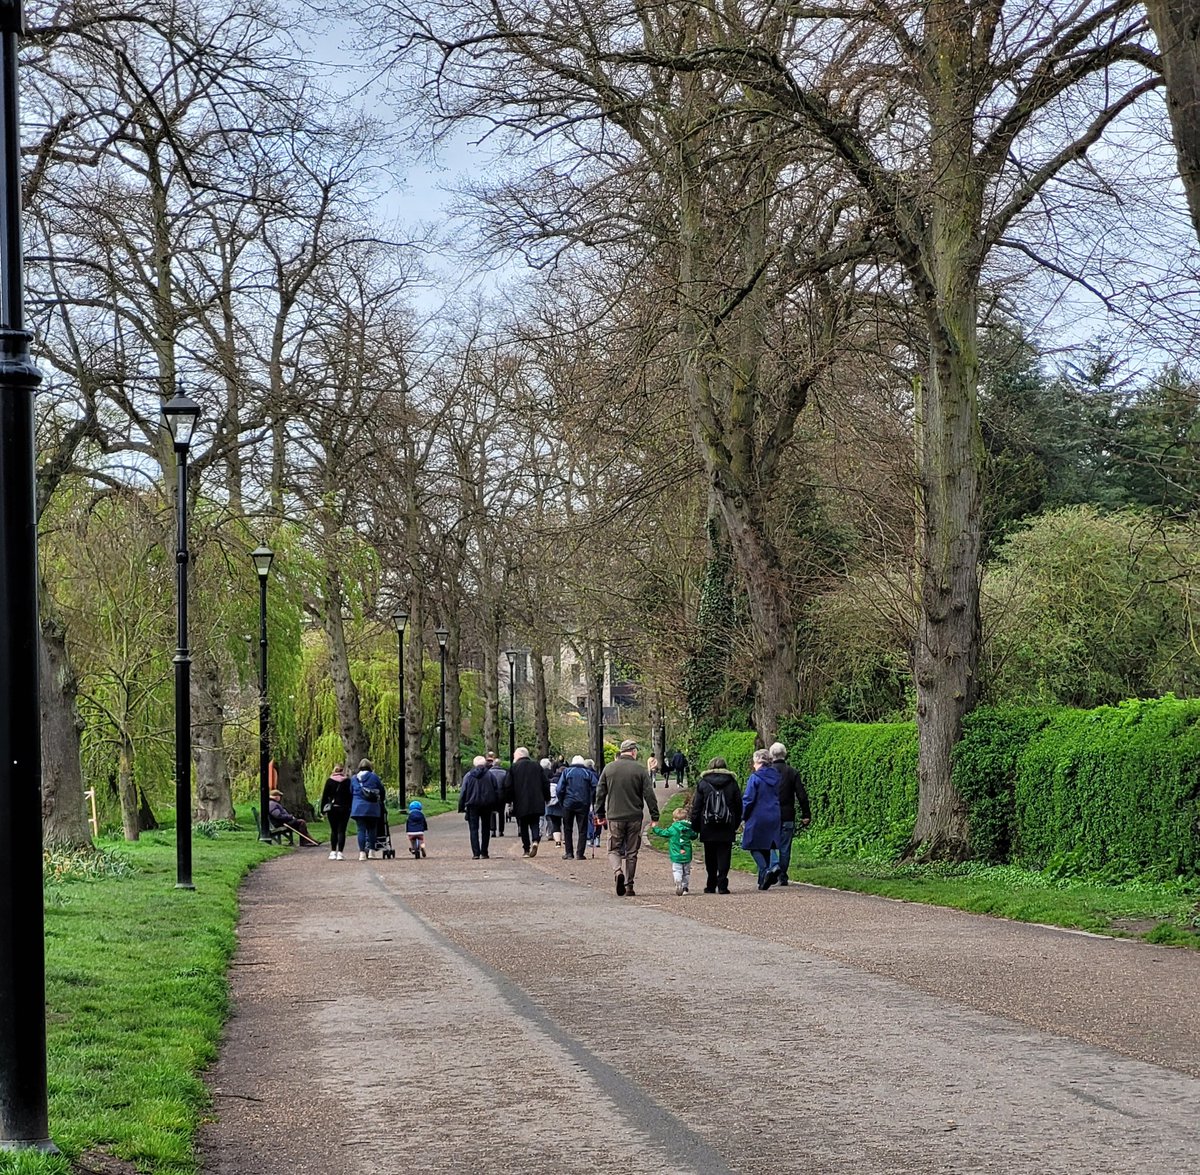 Taking a quick break from the office to grab some movement and coffee. 

The Quarry in Shrewsbury is buzzing with young and old. Walking, running, cycling  dog walking. All enjoying a warm spring Monday morning.

#10000steps #movemore #GetOutside #MondayMotivation